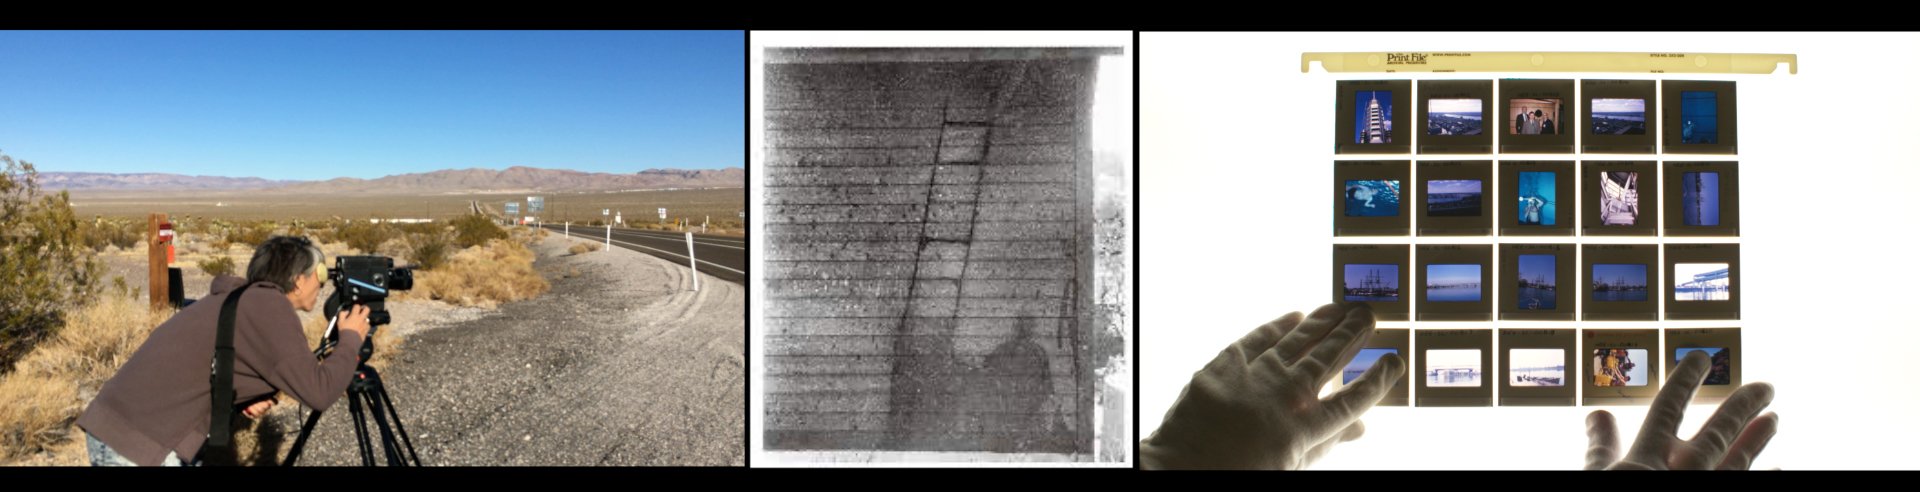 Filming at the Nevada Nuclear Test site / Hiroshima Atomic Shadow / MIT Museum Photo Archive. Images courtesy the artists | Katherine Waugh & Fergus Daly I See a Darkness | Friday 11 November – Sunday 20 November 2022 | Photo Museum Ireland